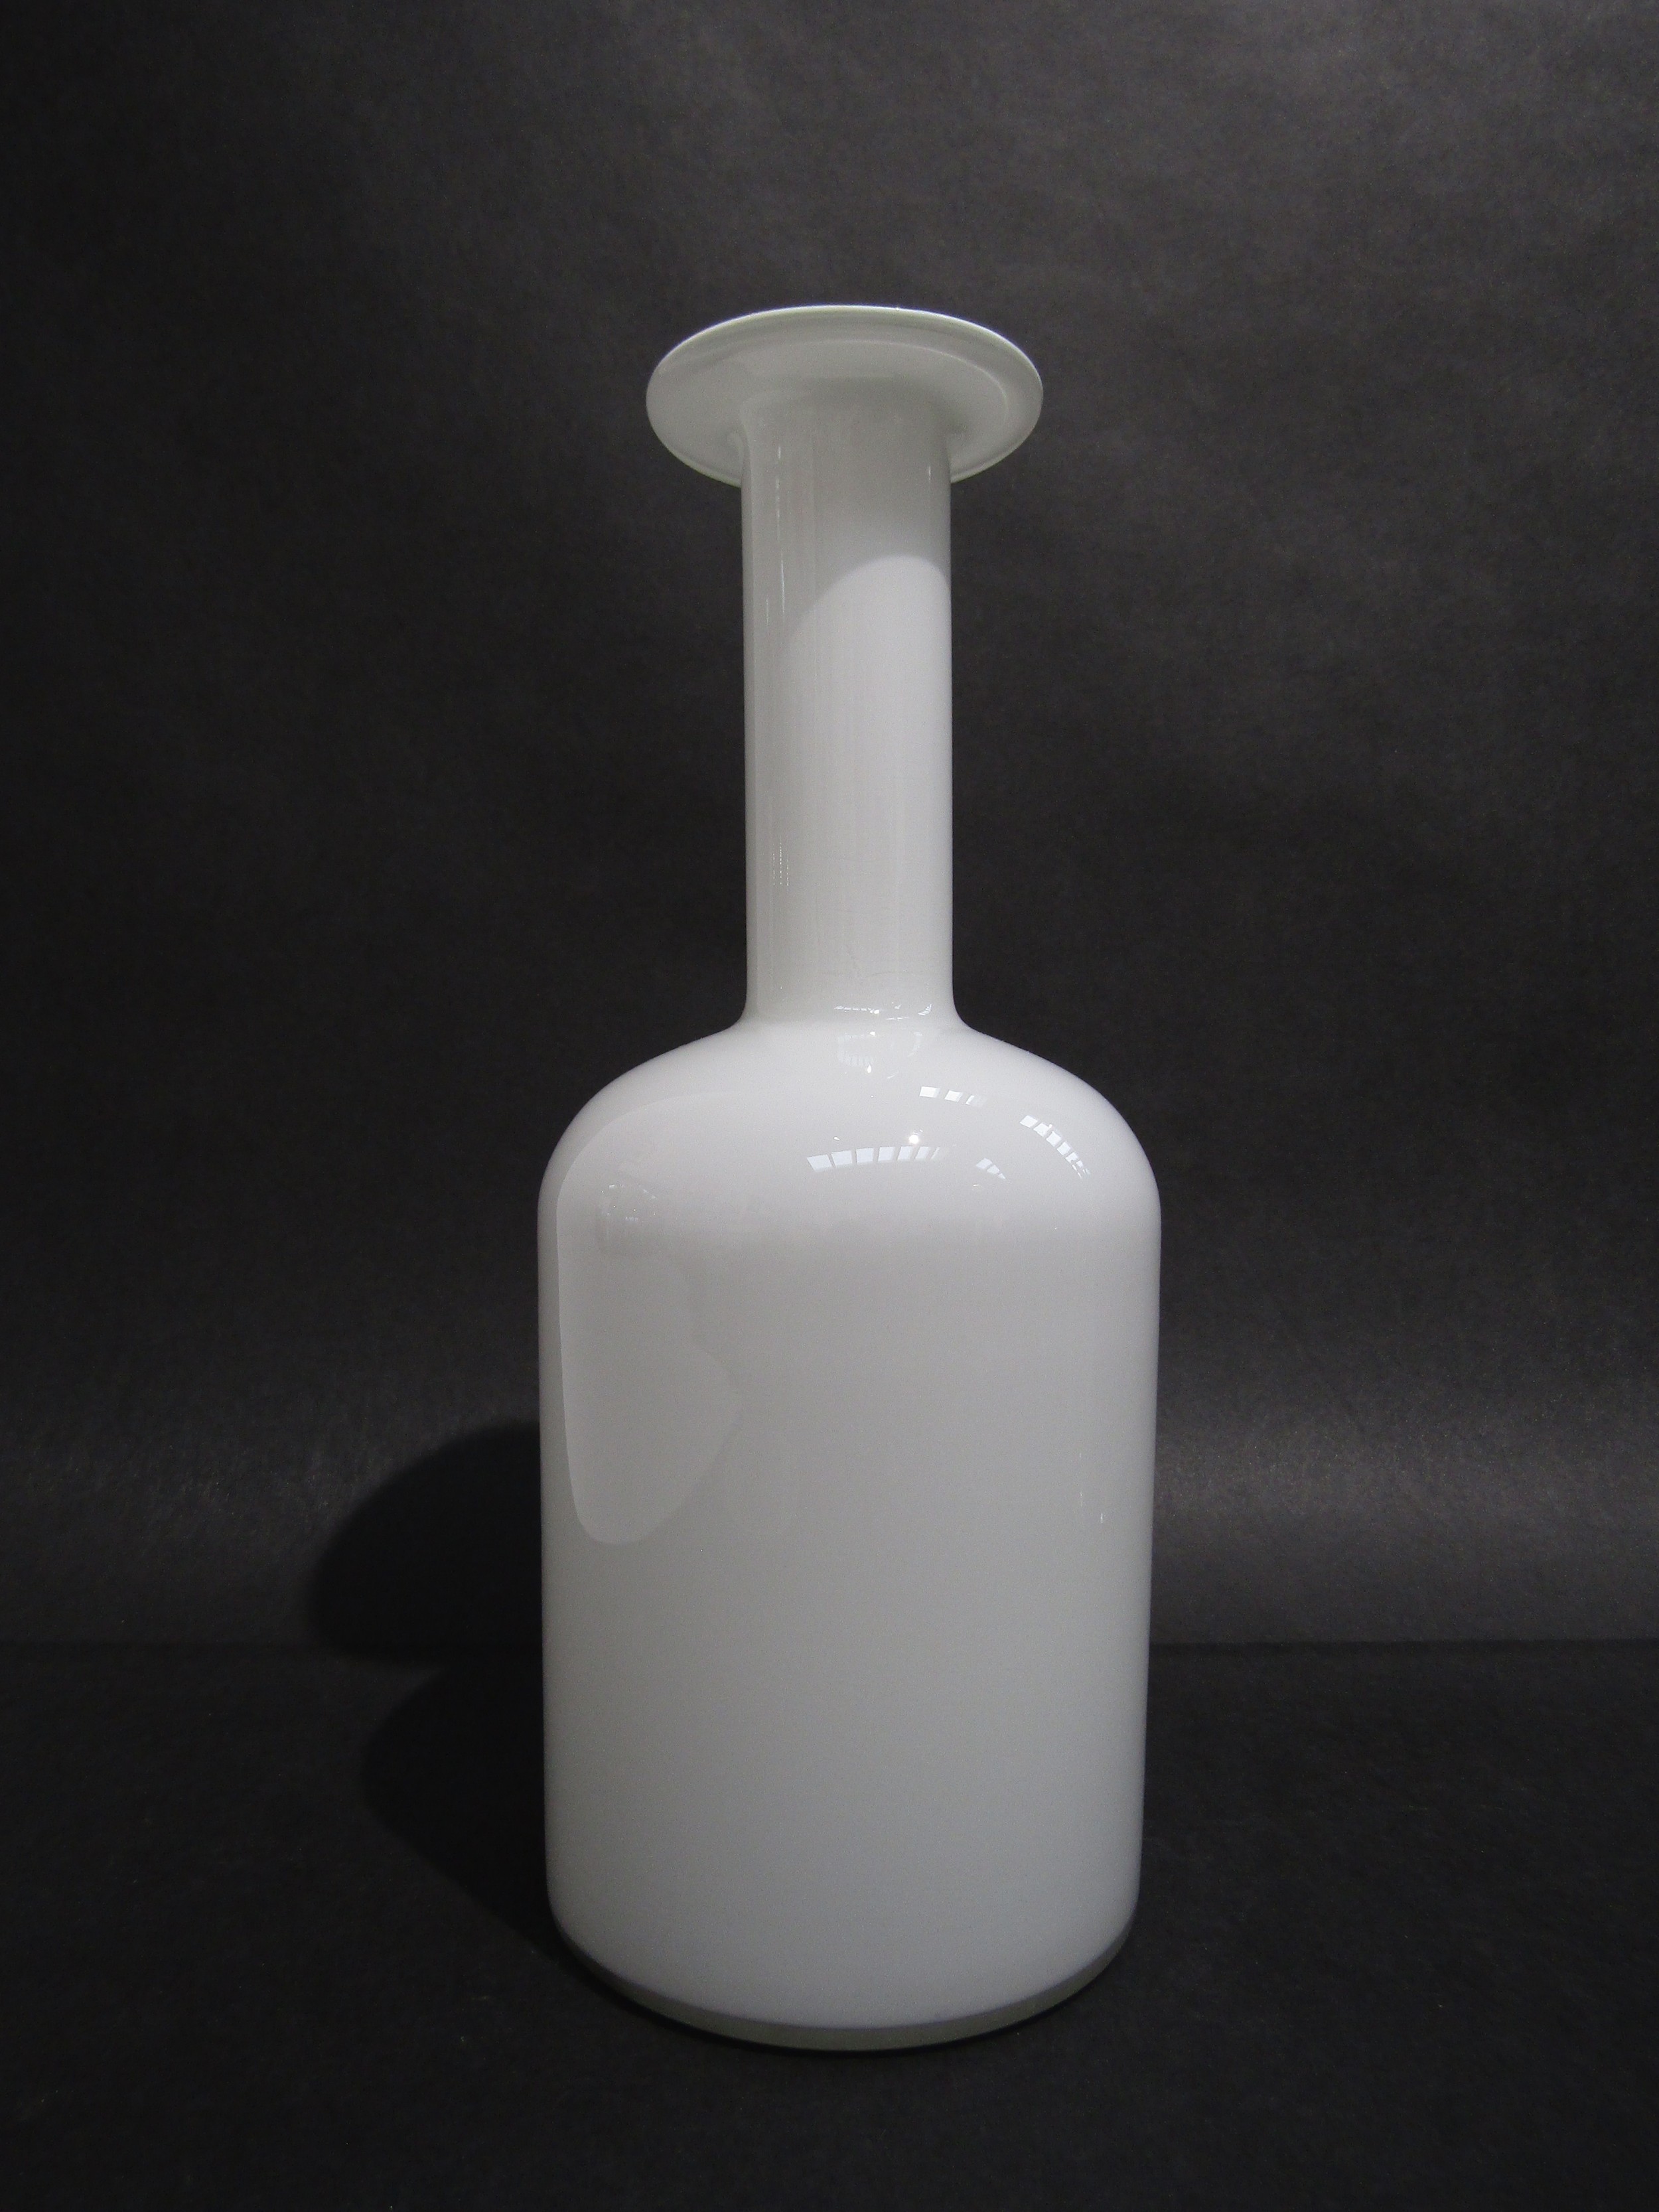 A Holmegaard "Gul" vase in opal glass designed in 1960's by Otto Brauer, 37cm high - Image 2 of 2